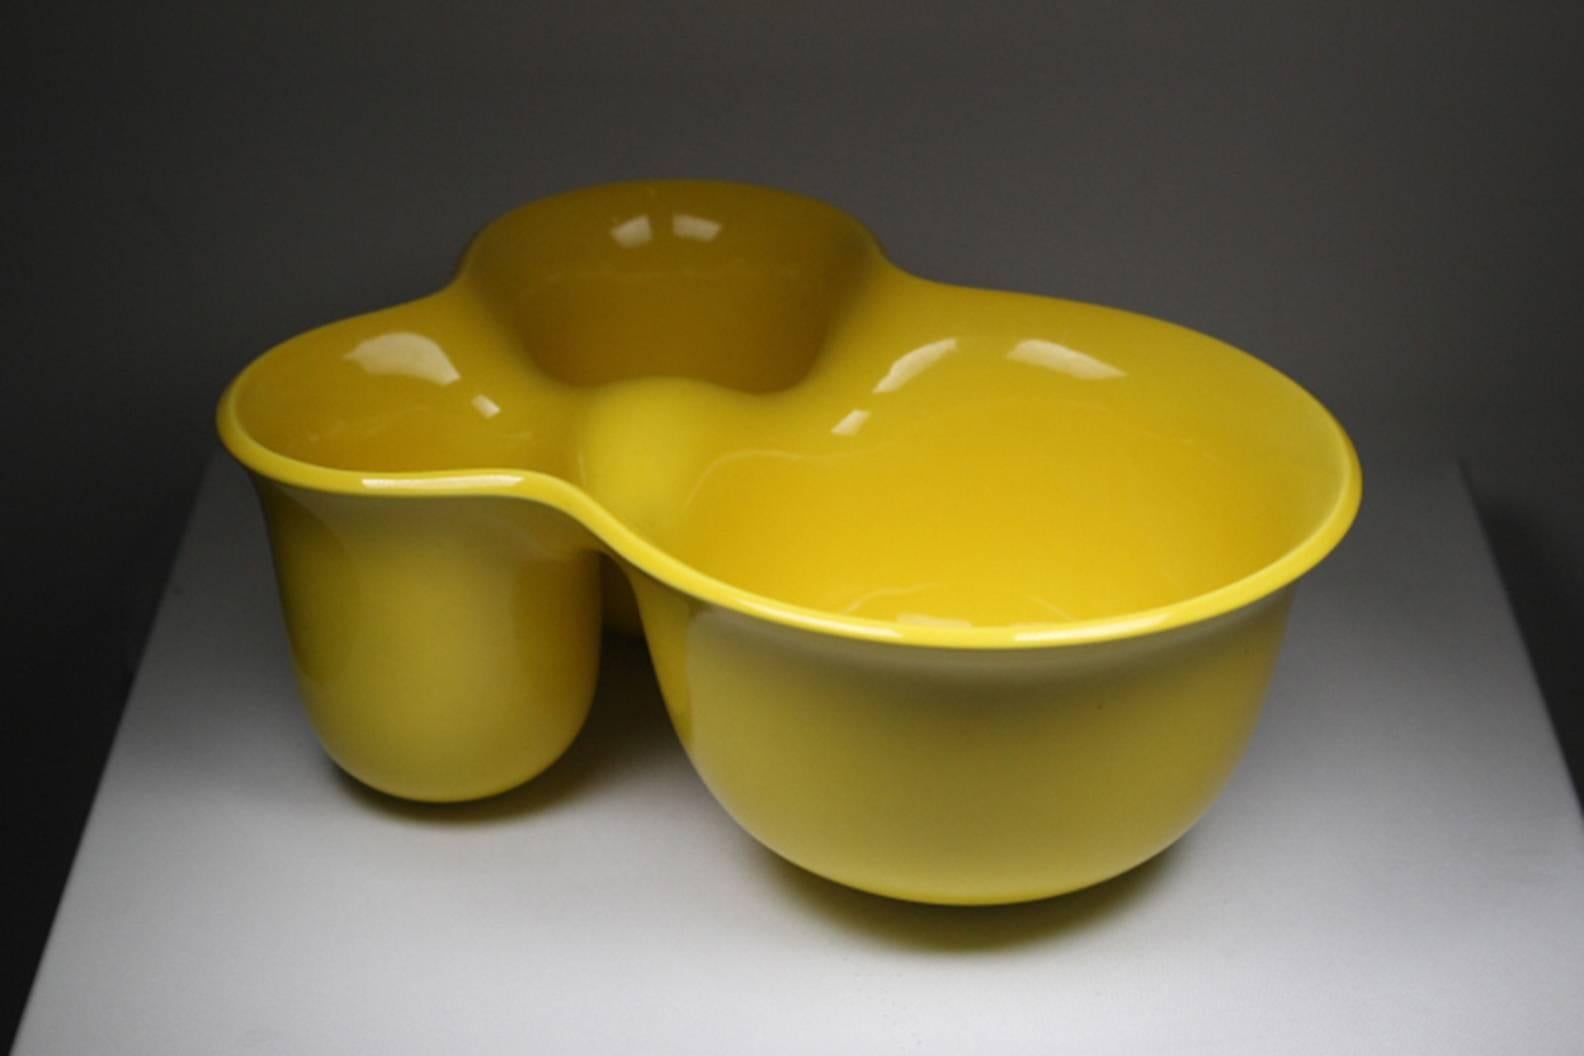 Vibrant glazed ceramic bowl, handcrafted in Italy with three sections. Perfect for the kitchen or a great pop of color in a living space.